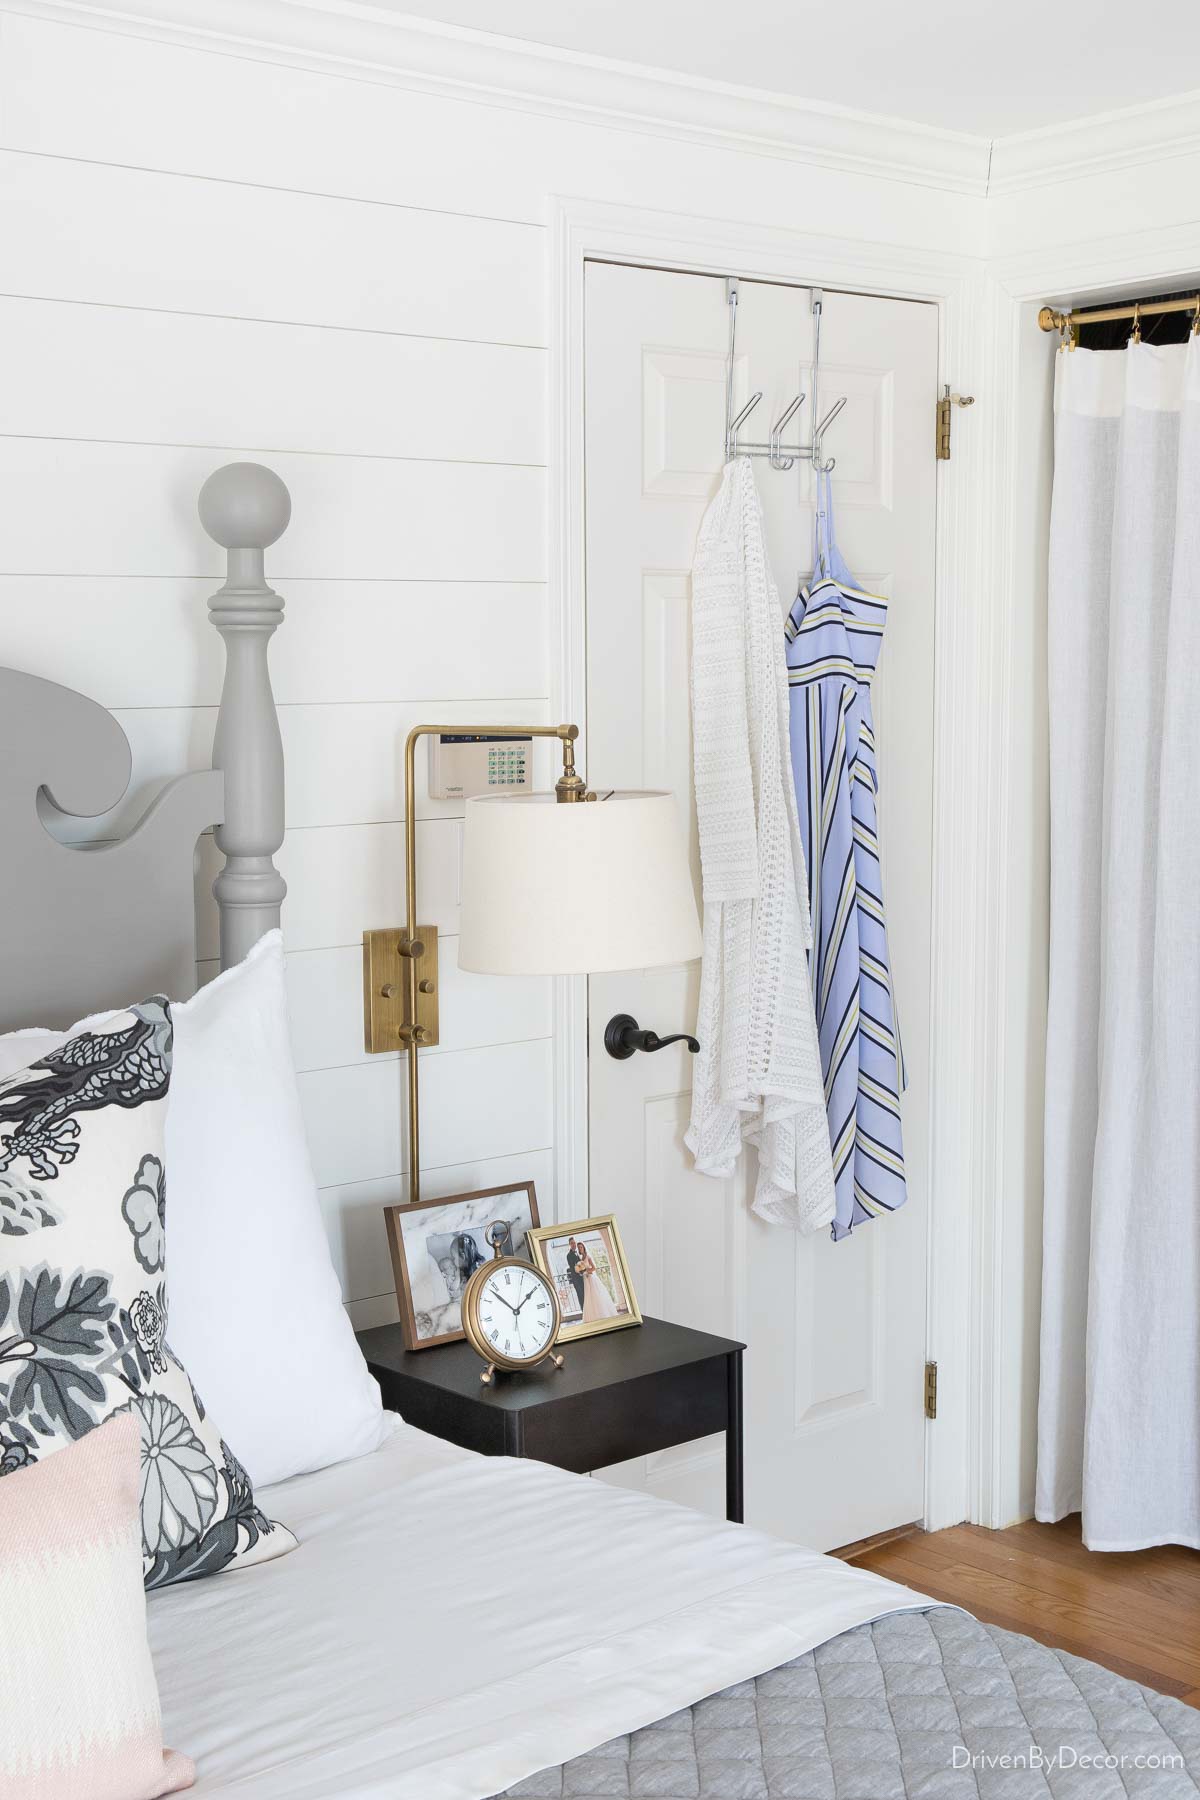 Over the door hanger with three hooks and clothes hanging from it for bedroom organization